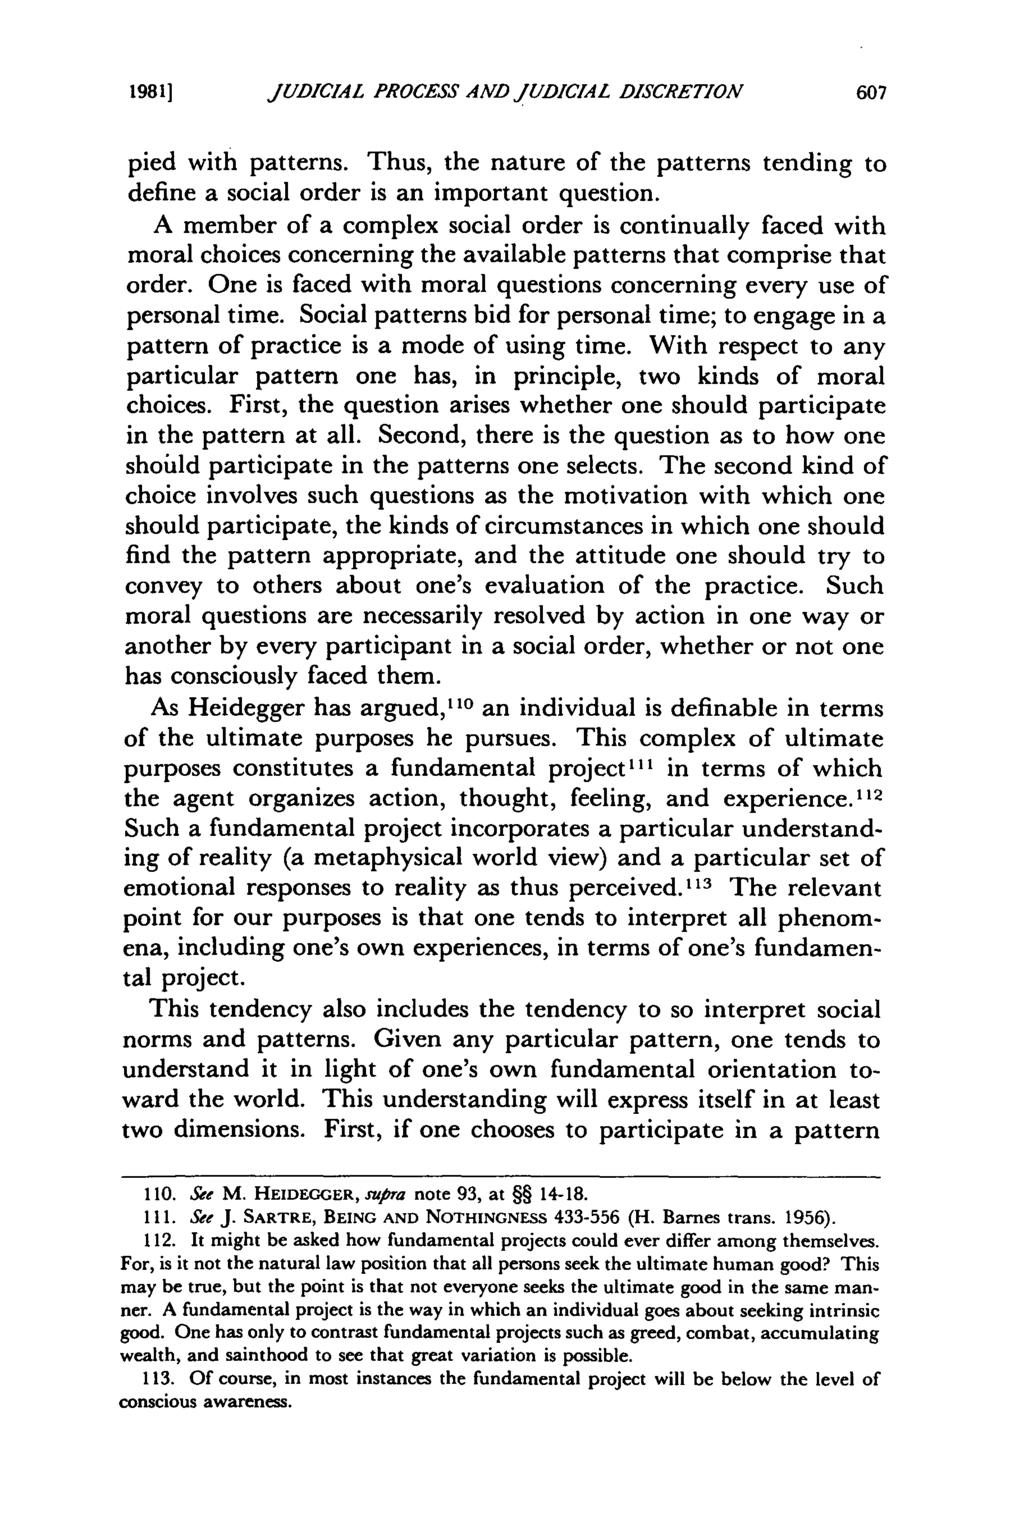 1981] Pannier: The Nature of the Judicial Process and Judicial Discretion JUDICIAL PROCESS AND JUDICIAL DISCRETION pied with patterns.